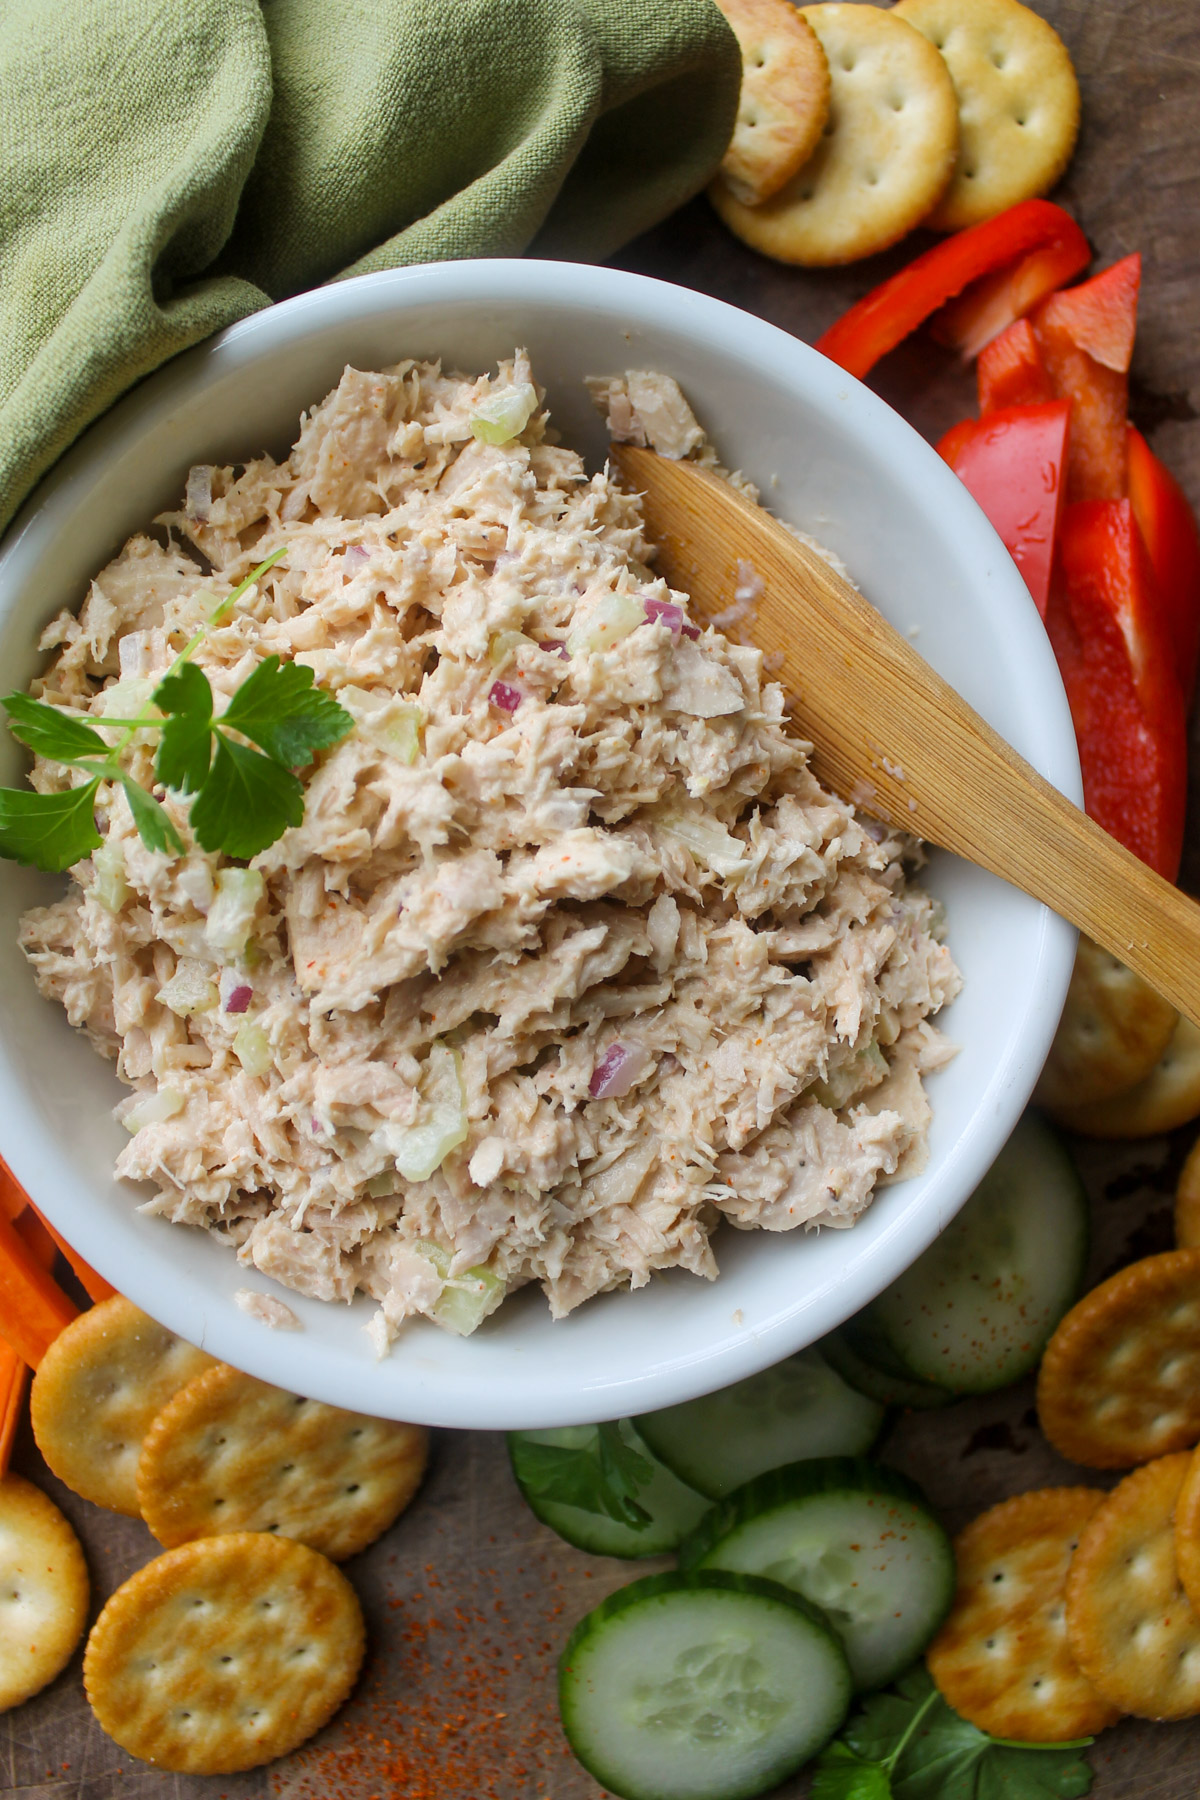 A white bowl of tuna salad surrounded with red bell peppers, cucumbers, and crackers.